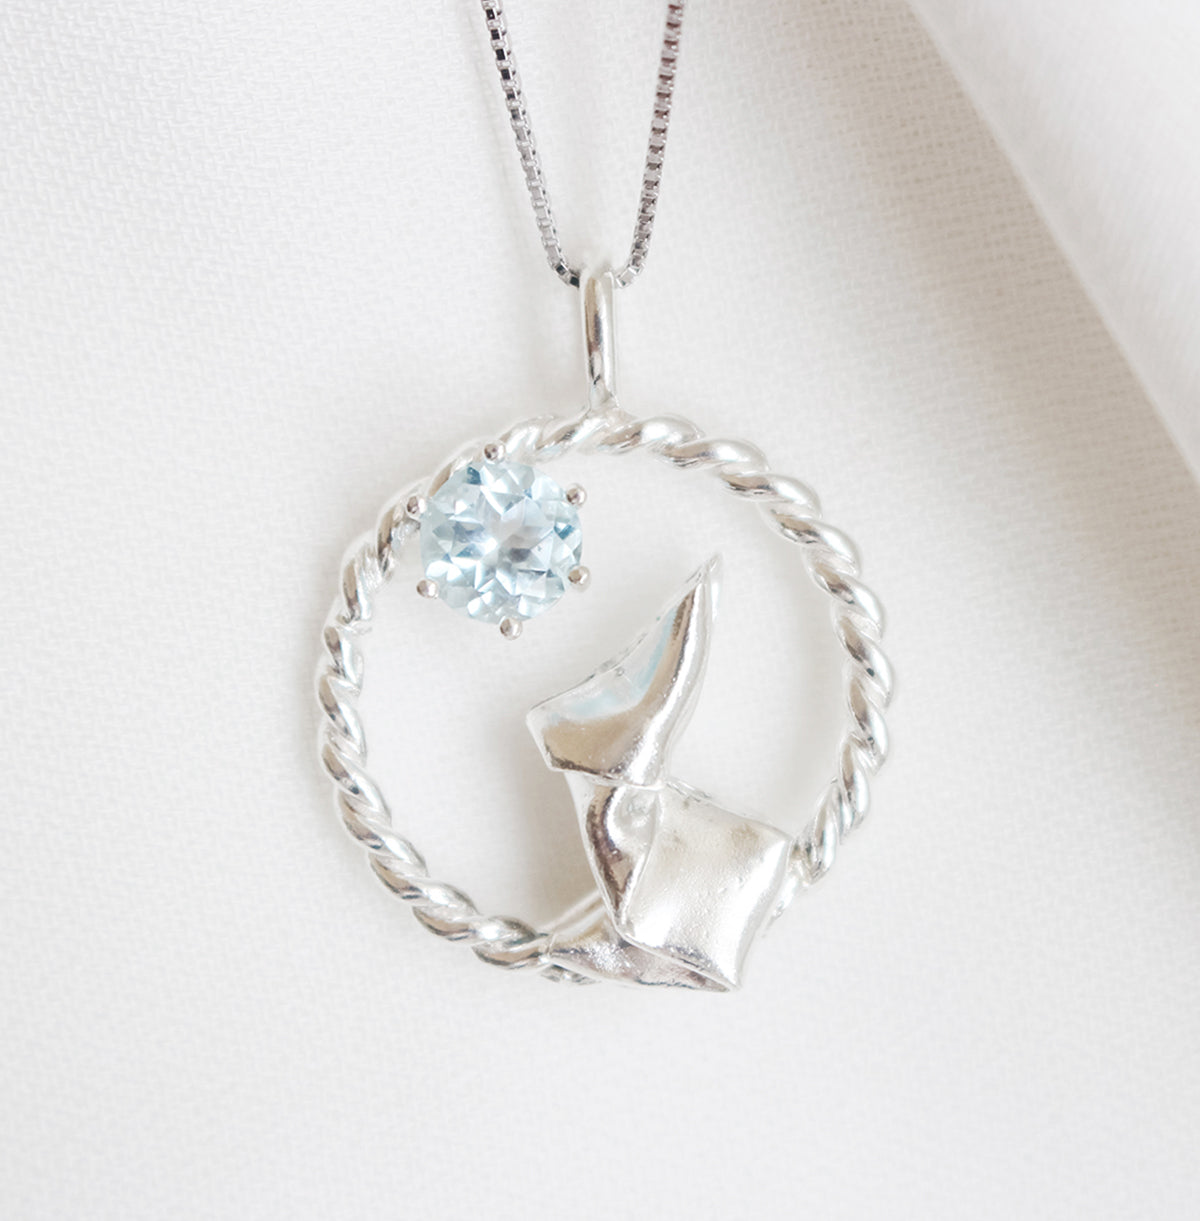 Origami Moon Rabbit with Sky Blue Topaz Necklace